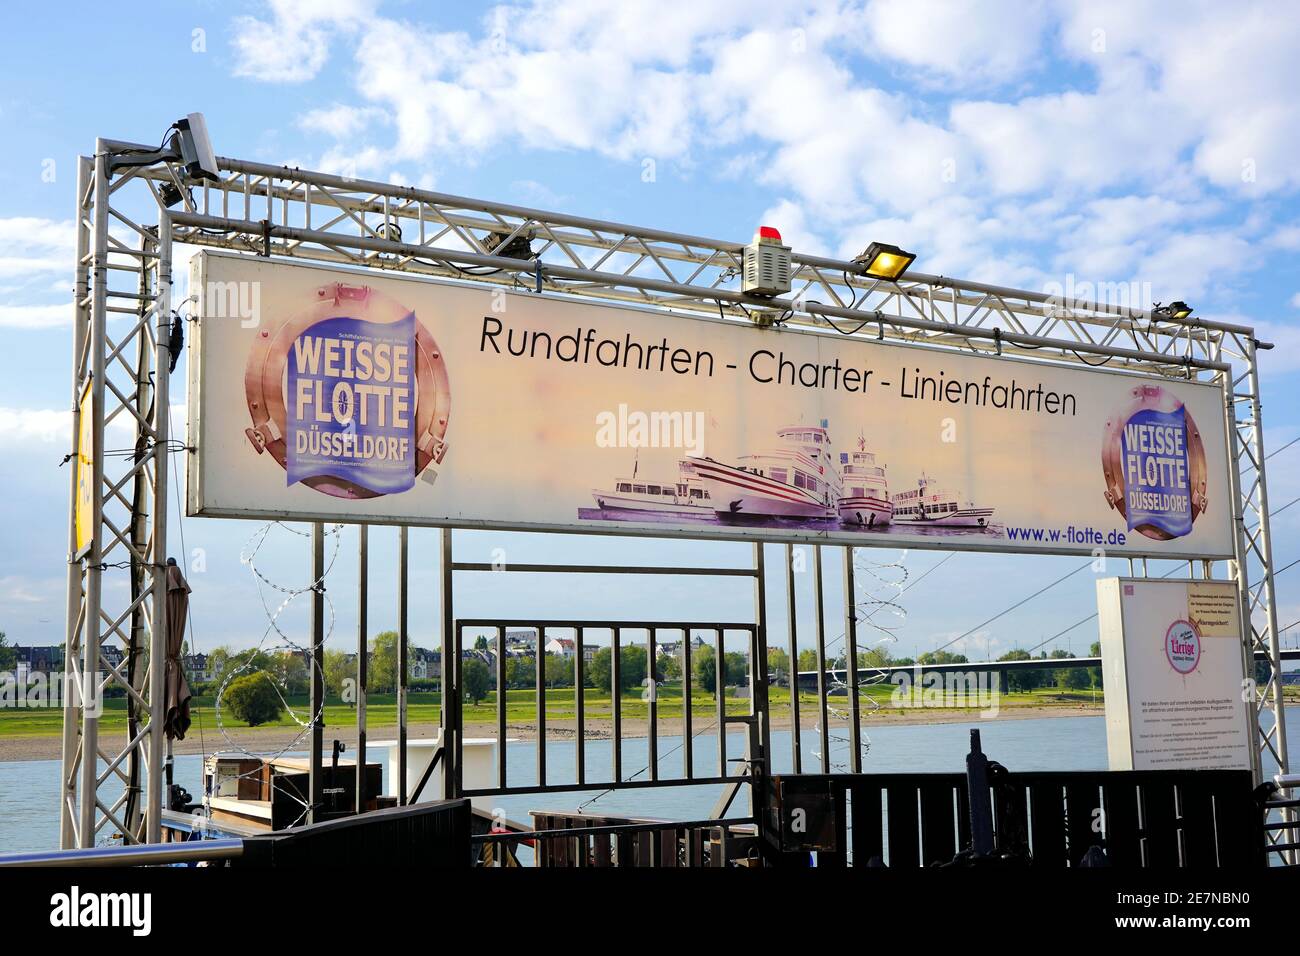 'Weisse Flotte' cruise ship advertisement at the Rhine river promenade on a beautiful sunny day. Stock Photo